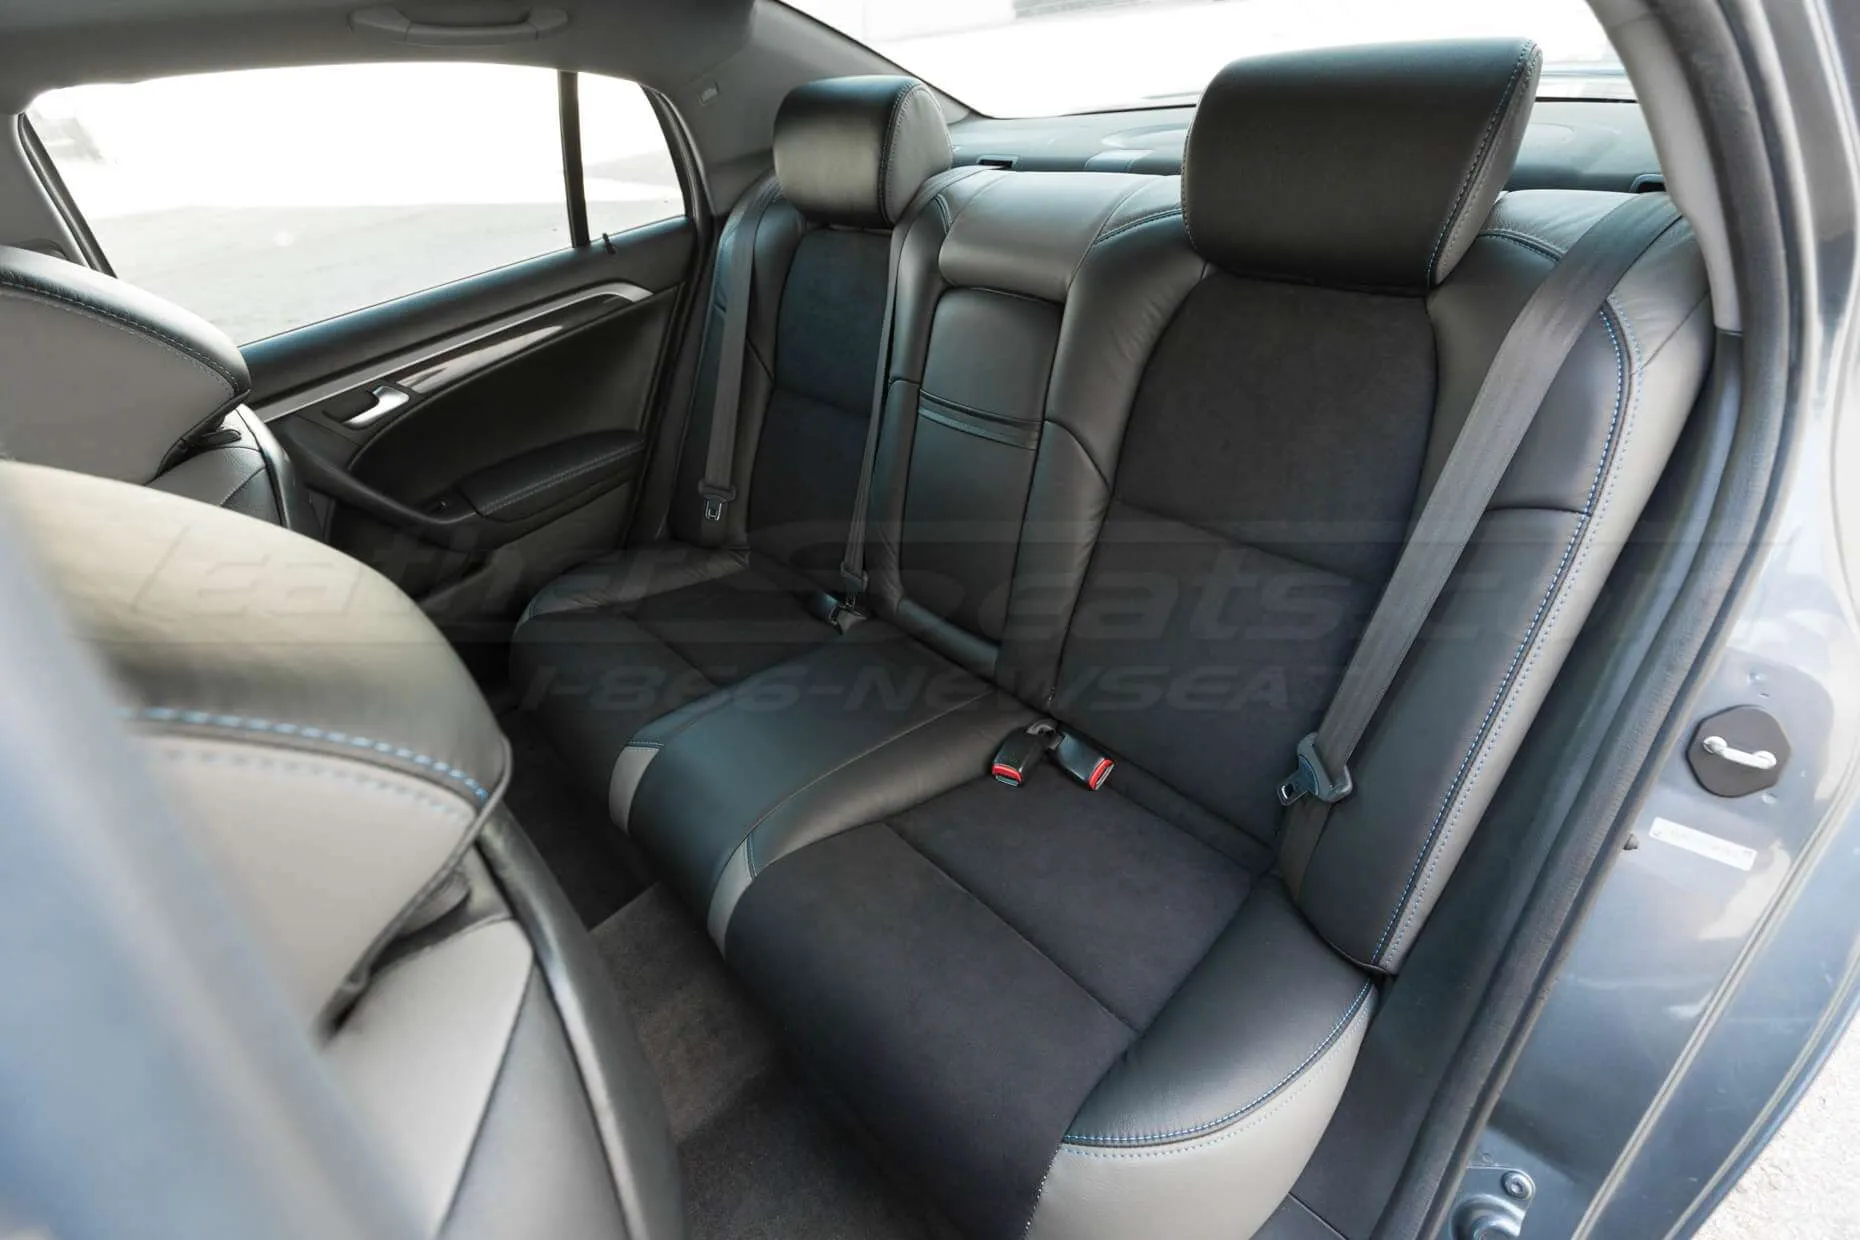 Installed rear seat leather upholstery